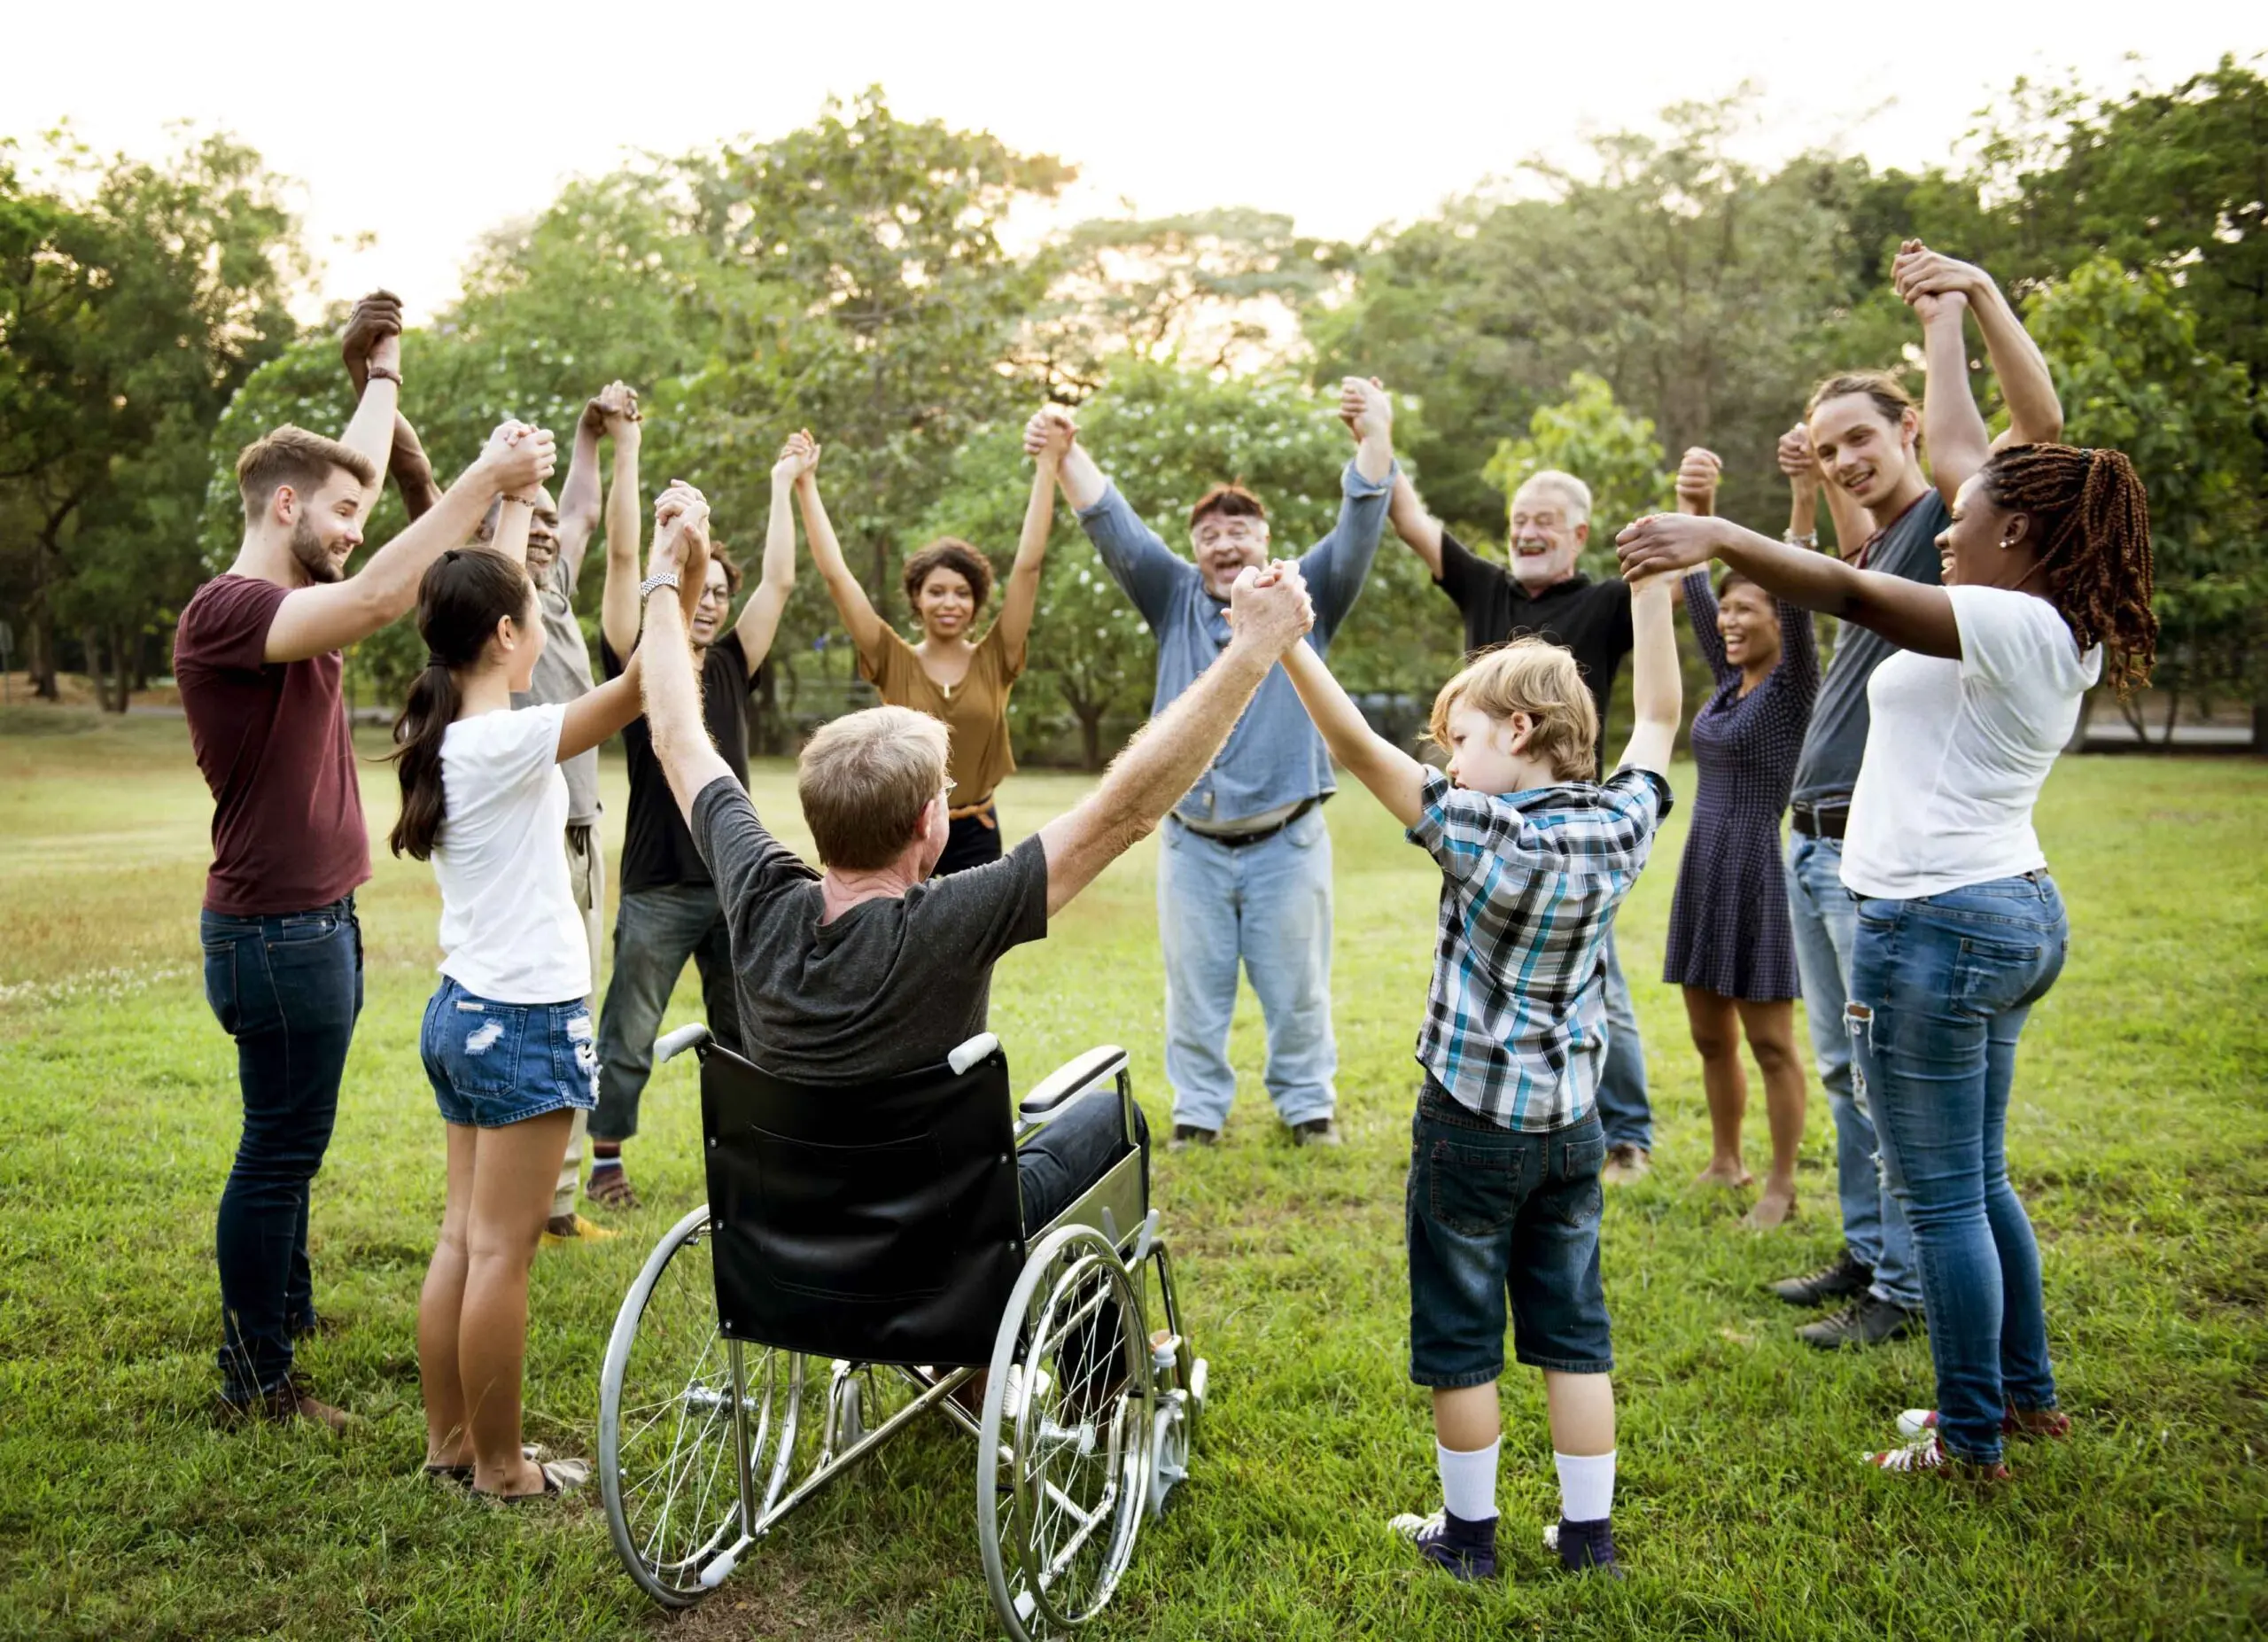 A mix of smiling adults and children stand in a circle in a park holding eachothers hands in the air. One man in the foreground is in a wheelchair